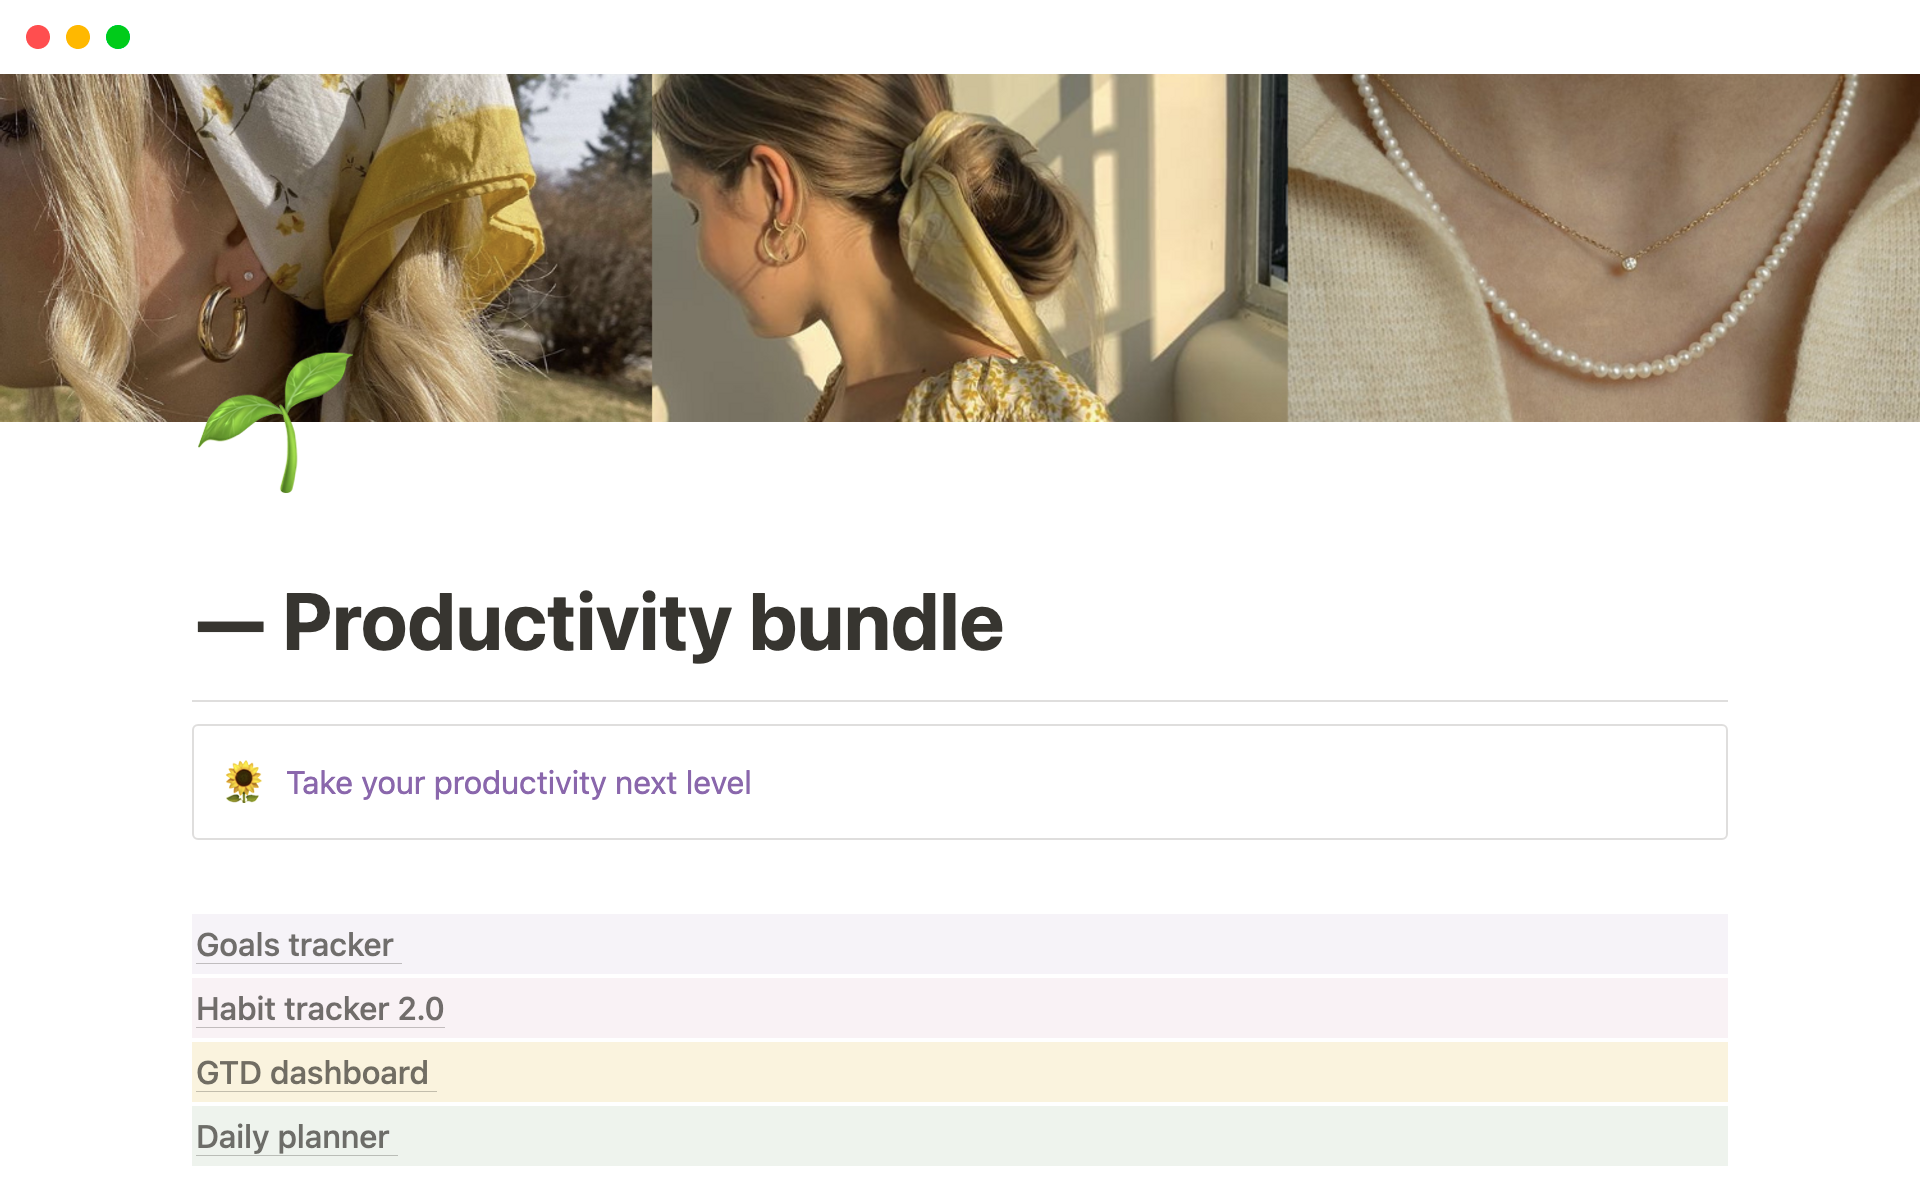 This productivity bundle is a collection of 4 notion templates designed to enhance productivity and efficiency in various aspects of work and life.